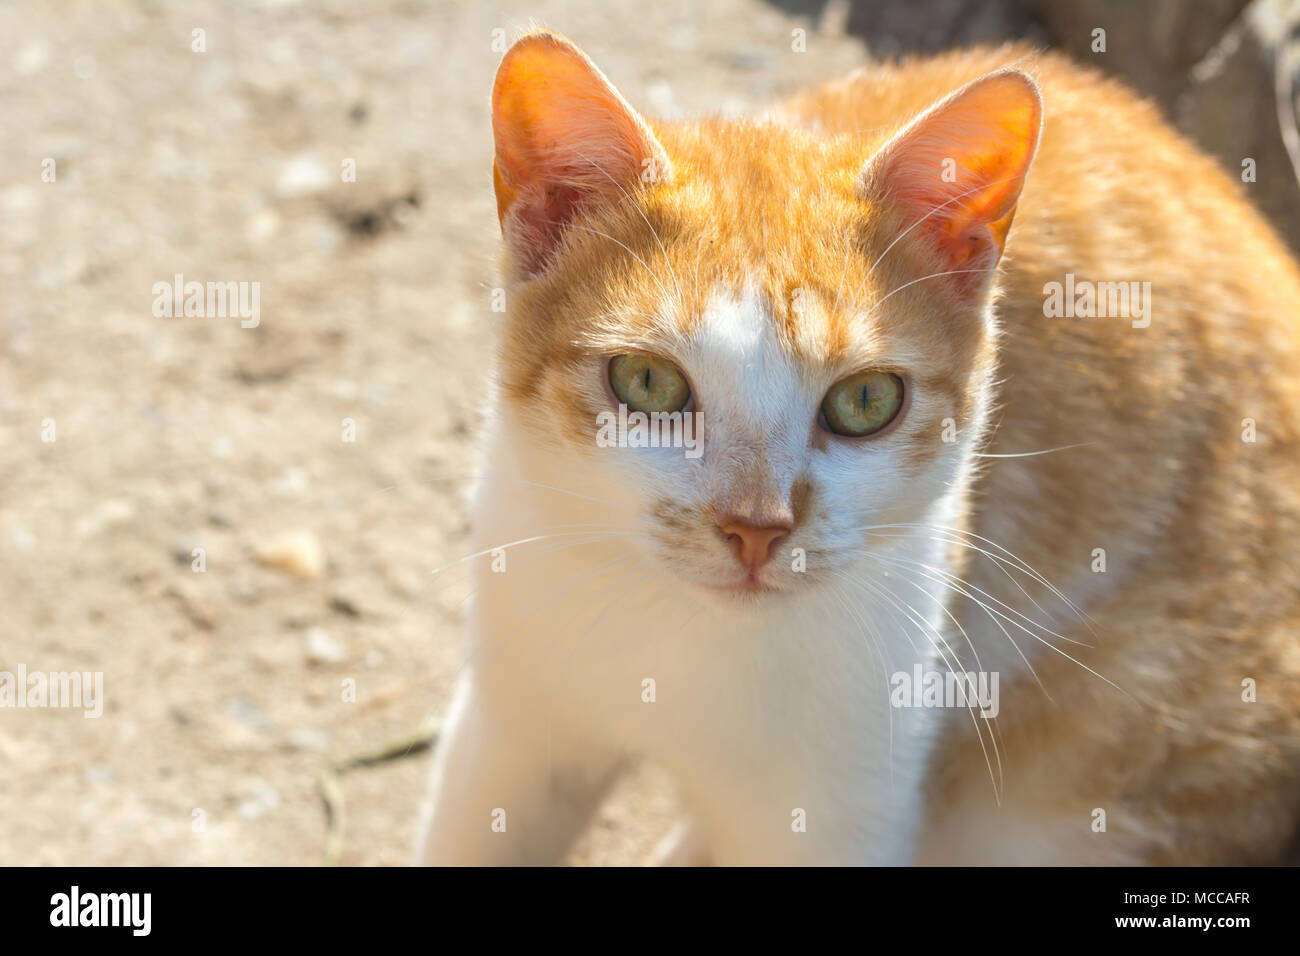 Orange,white cat looking straight to camera, ,domestic cat, relaxing cat, emotional eyed cats, Stock Photo